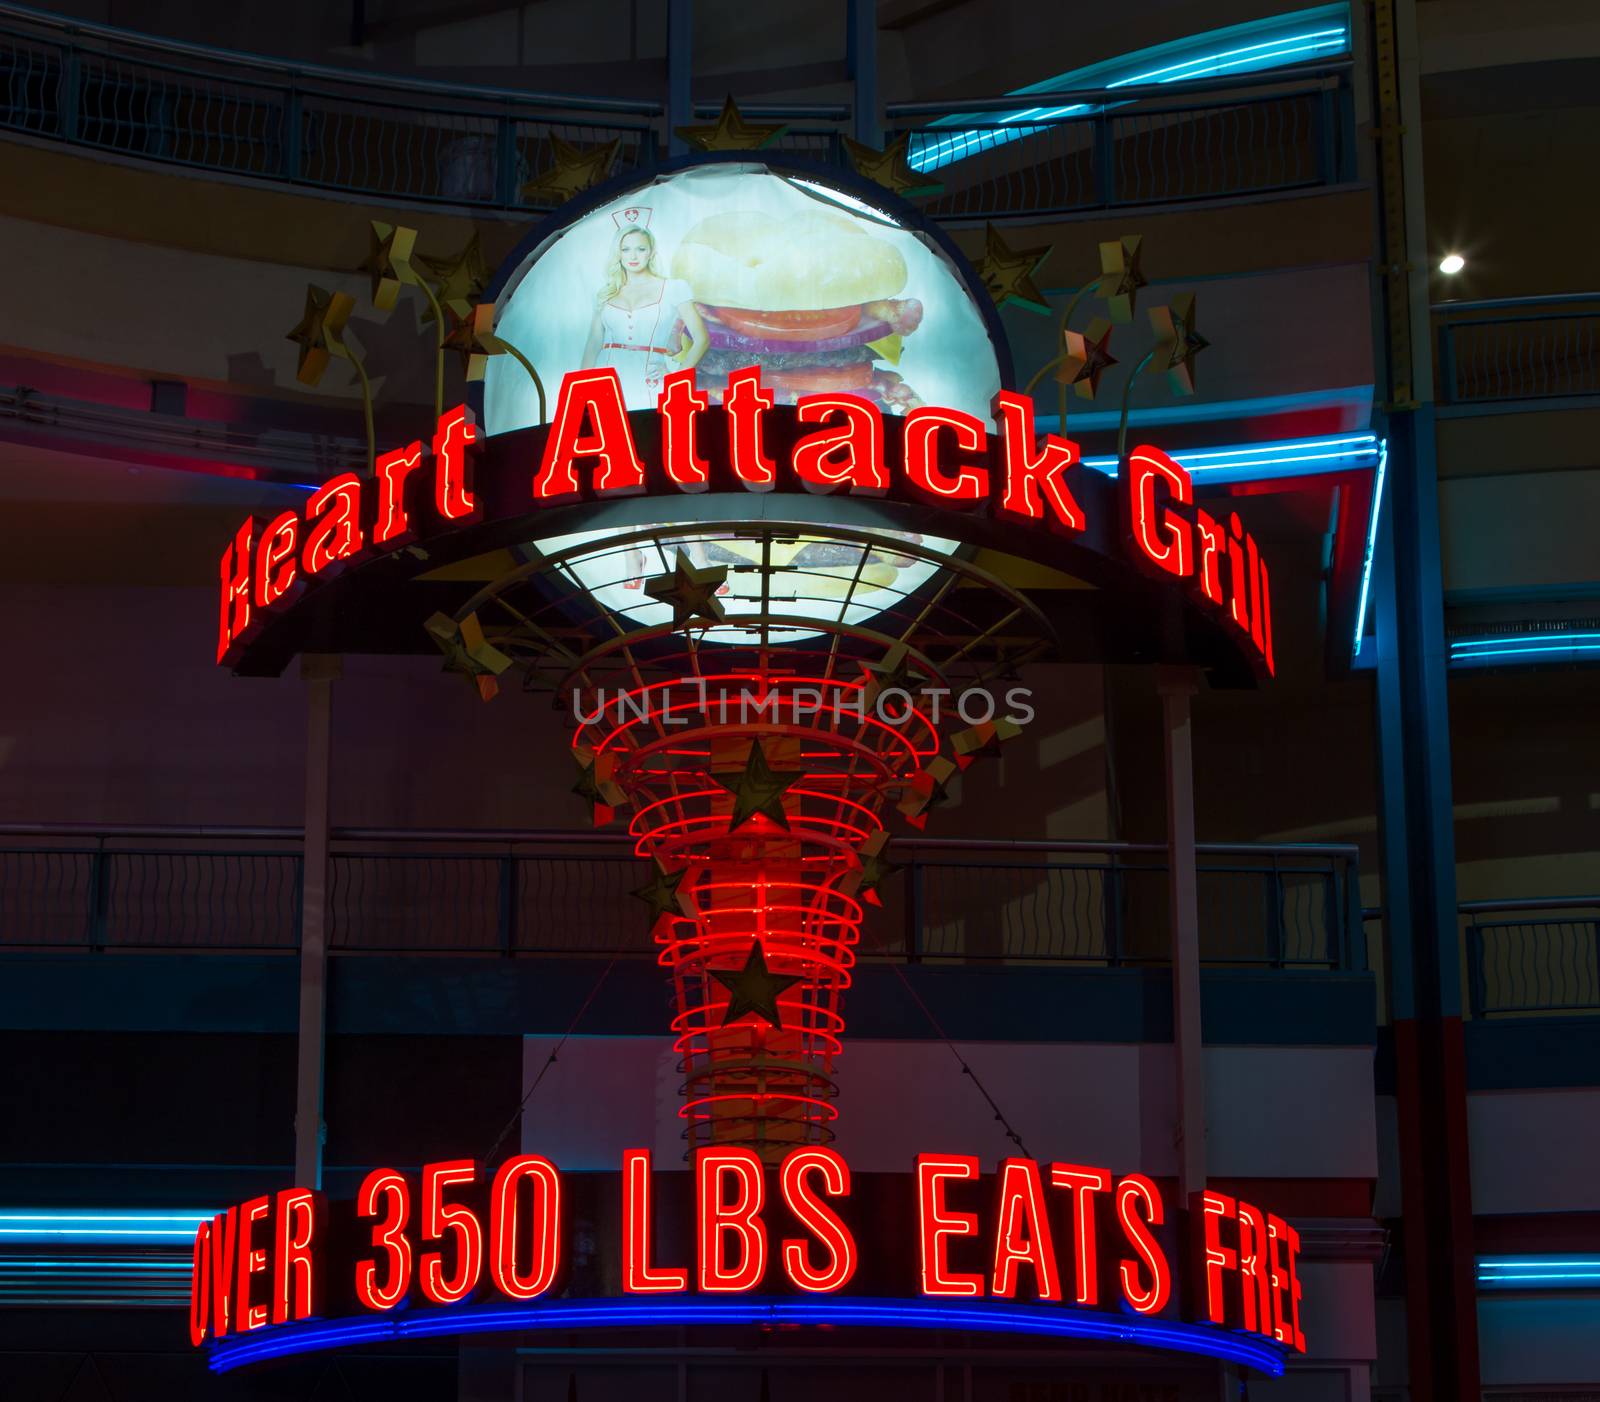 Heart Attack Grill Sign and Logo by wolterk